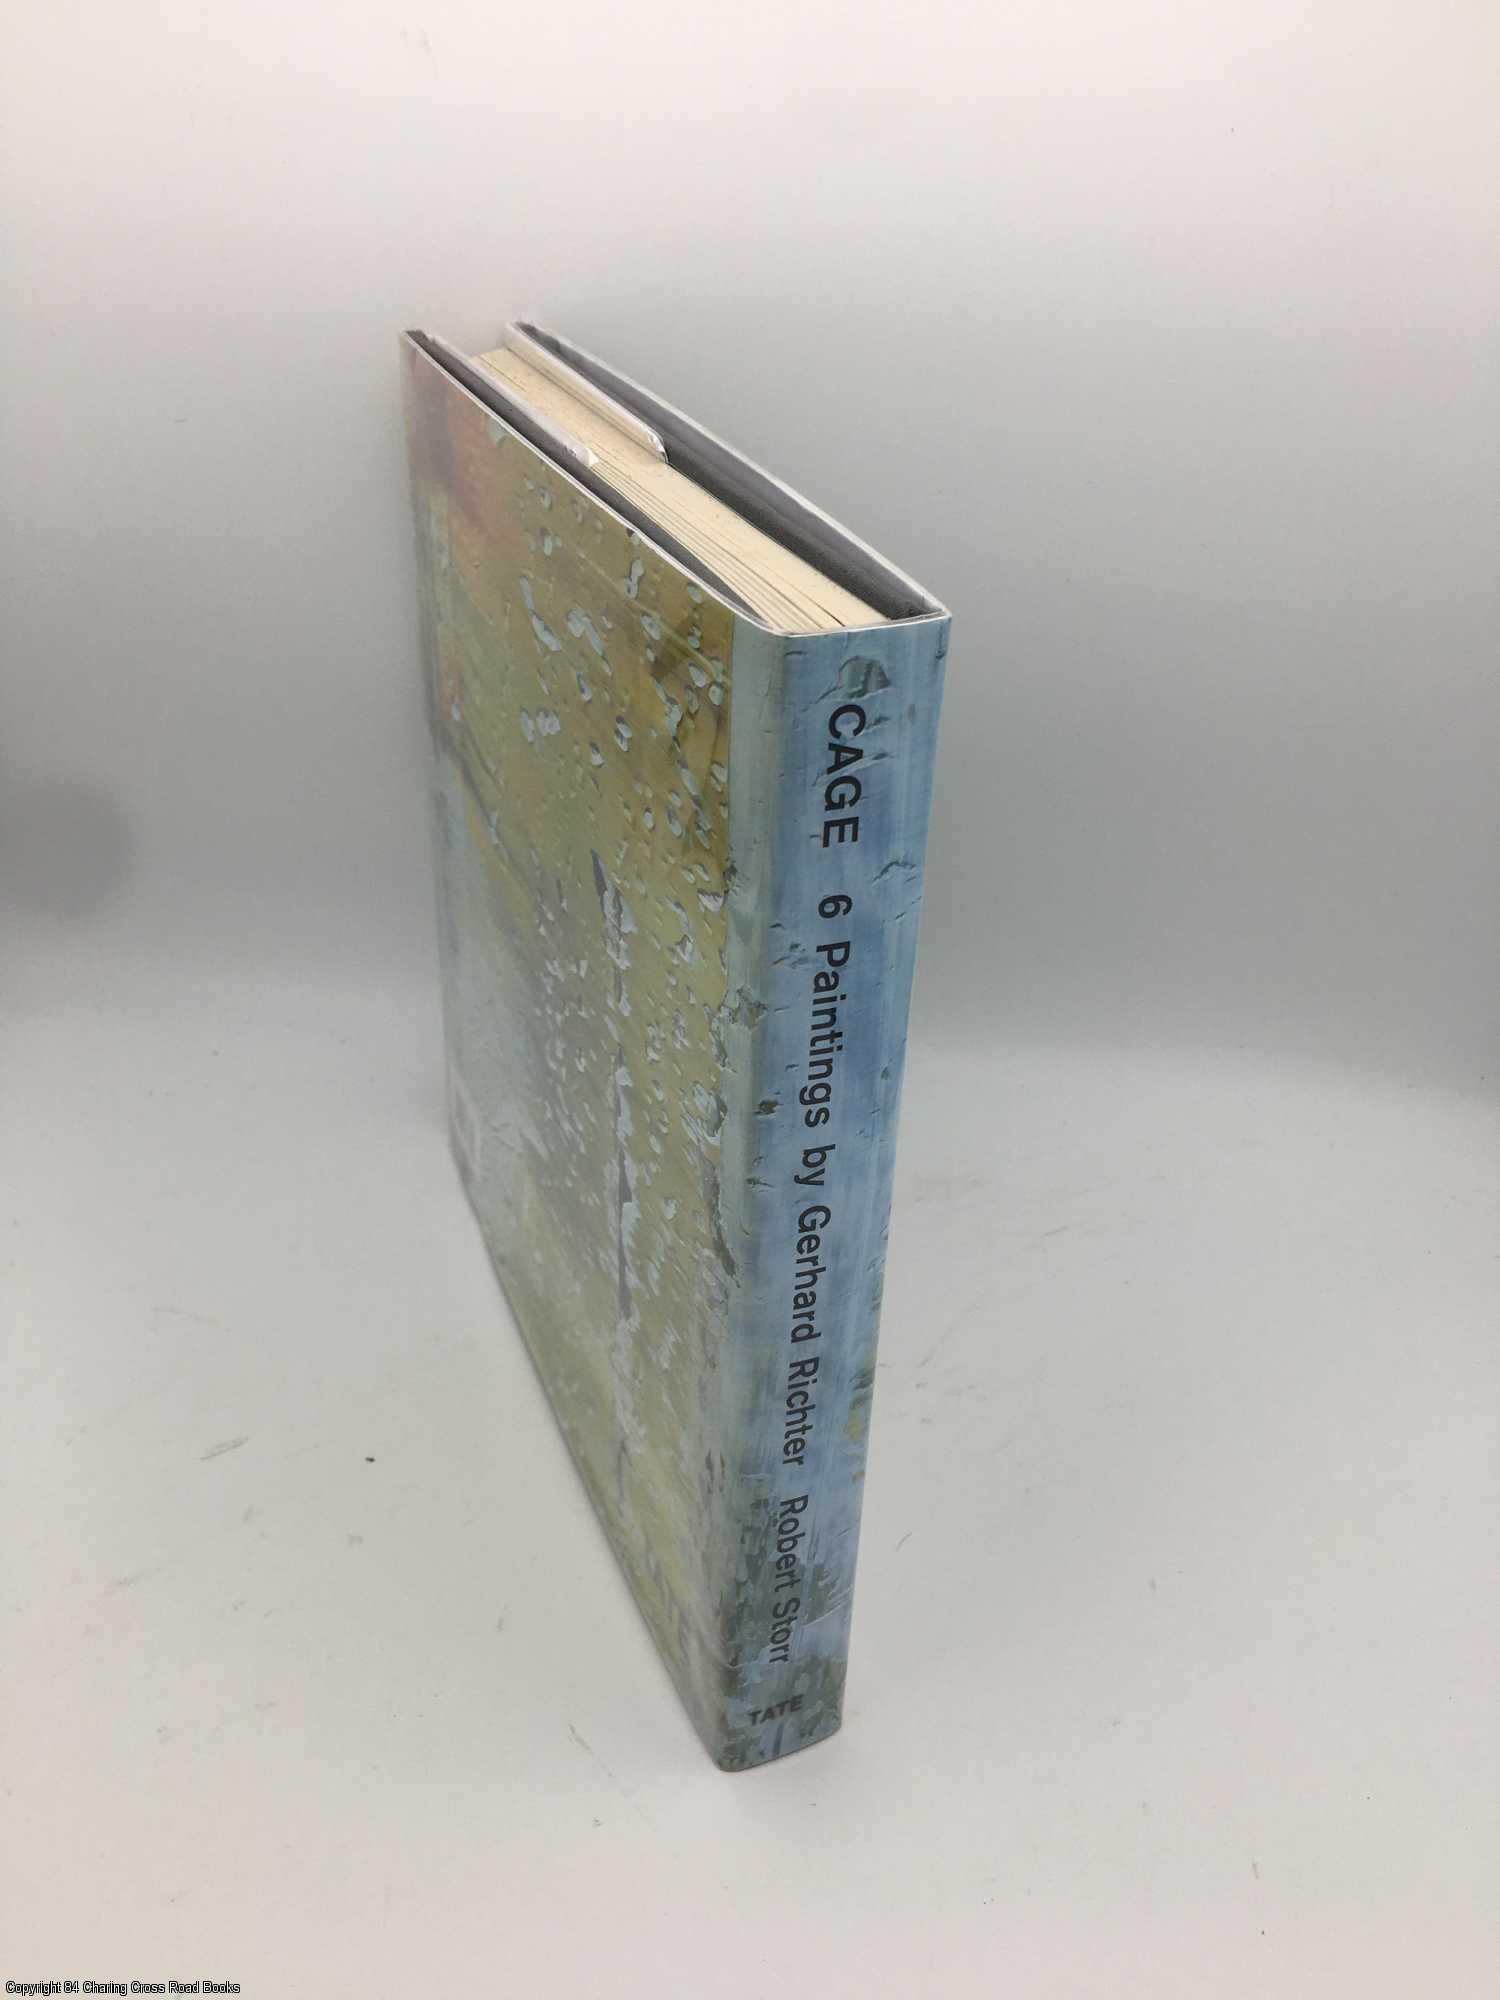 Cage: Six Paintings by Gerhard Richter by Robert Storr, Gerhard Richter on  84 Charing Cross Rare Books